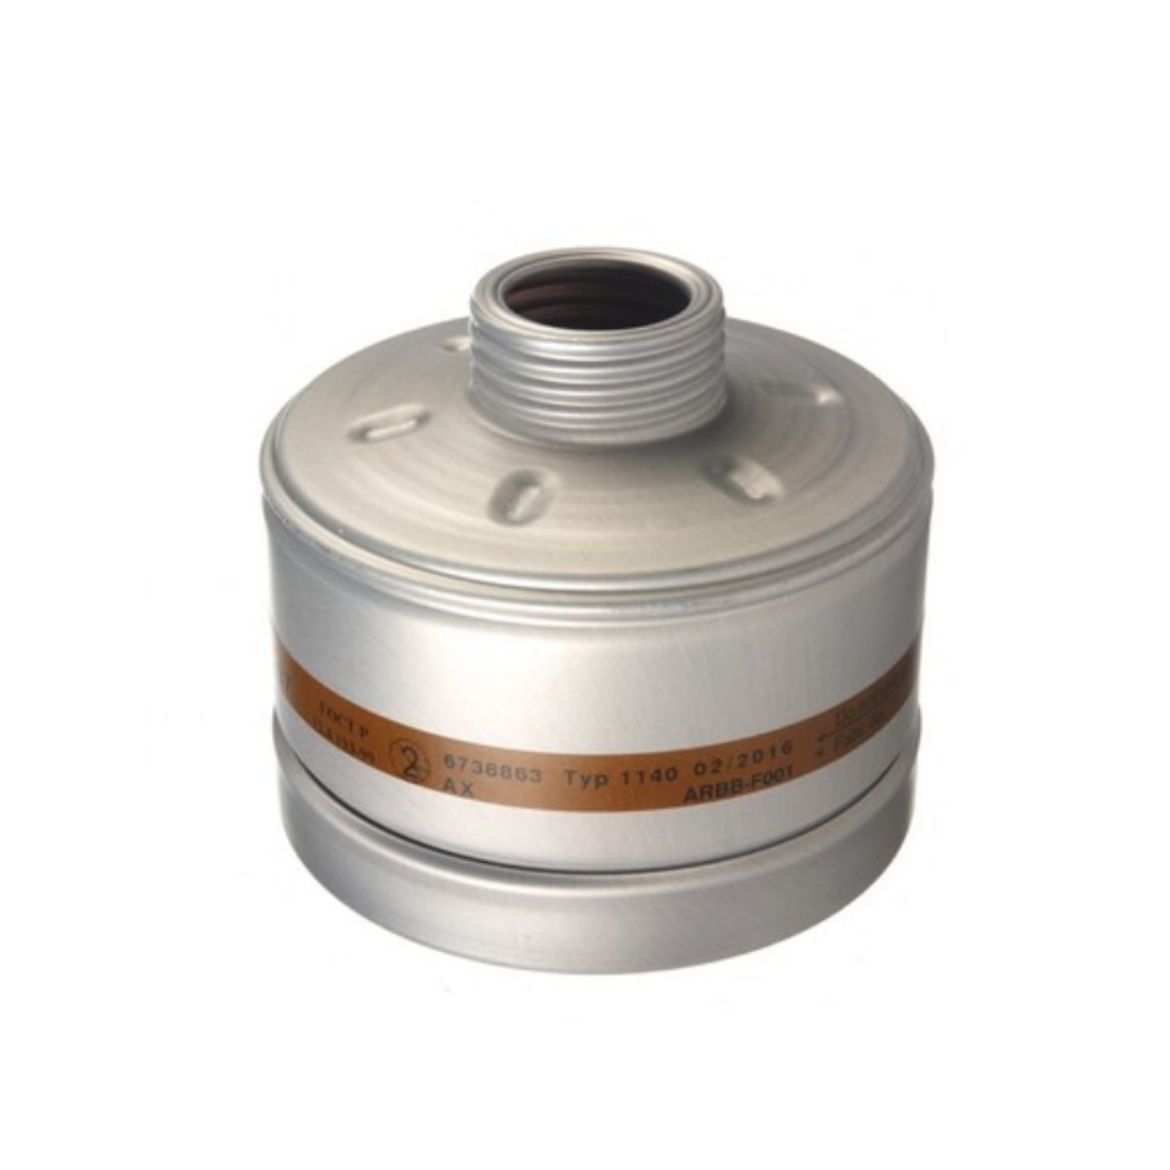 Picture of RD40 GAS FILTER 1140 AX